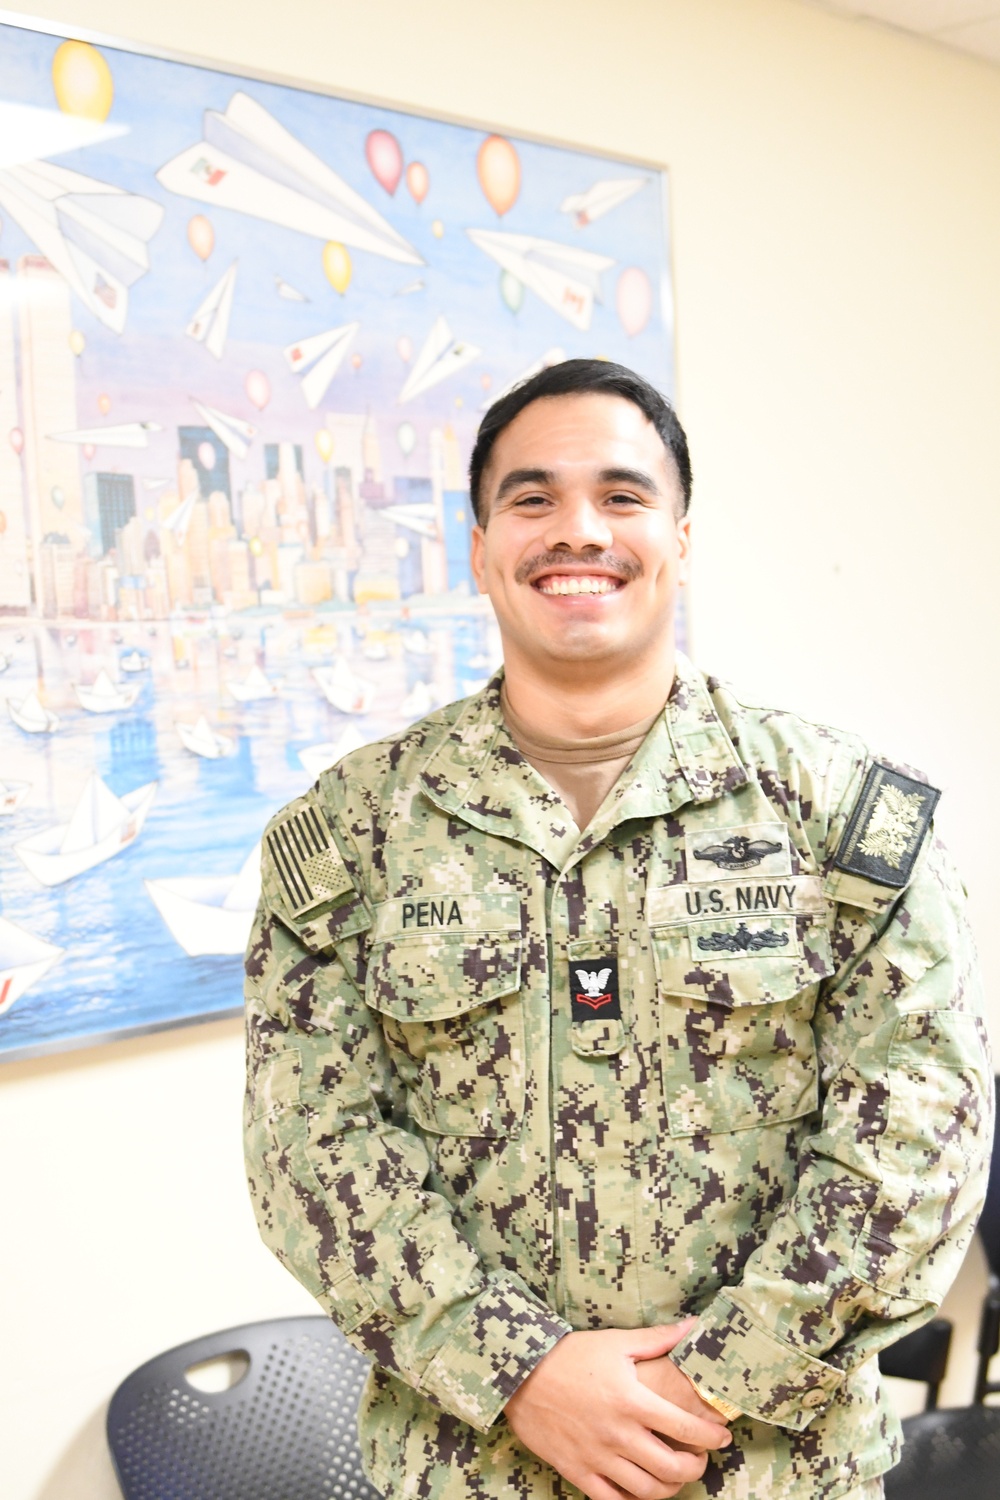 Meet our Sailor in the Spotlight!